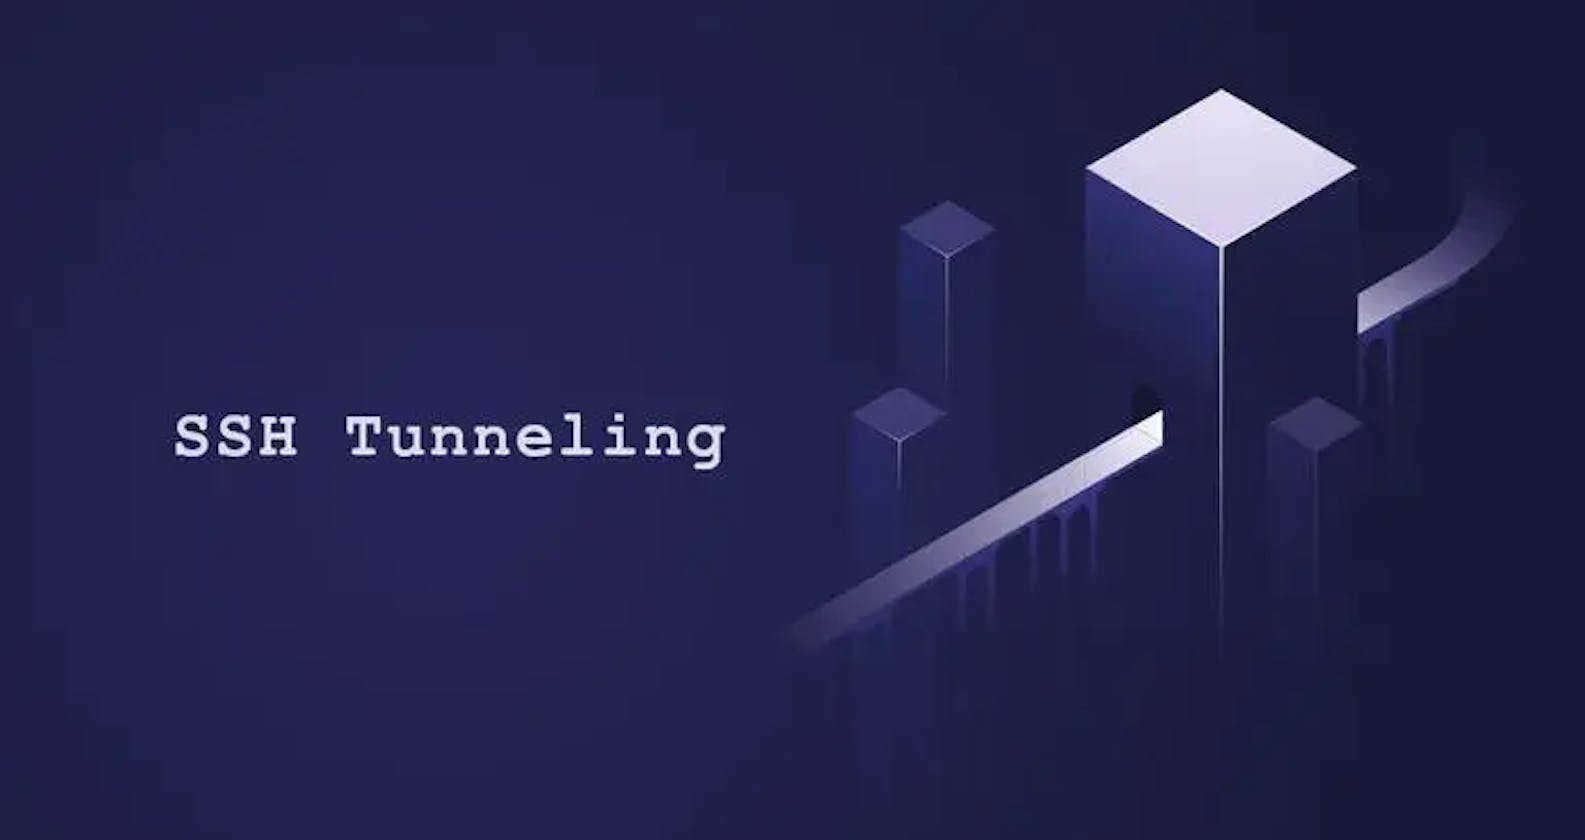 How to Create SSH Tunneling or Port Forwarding in Linux